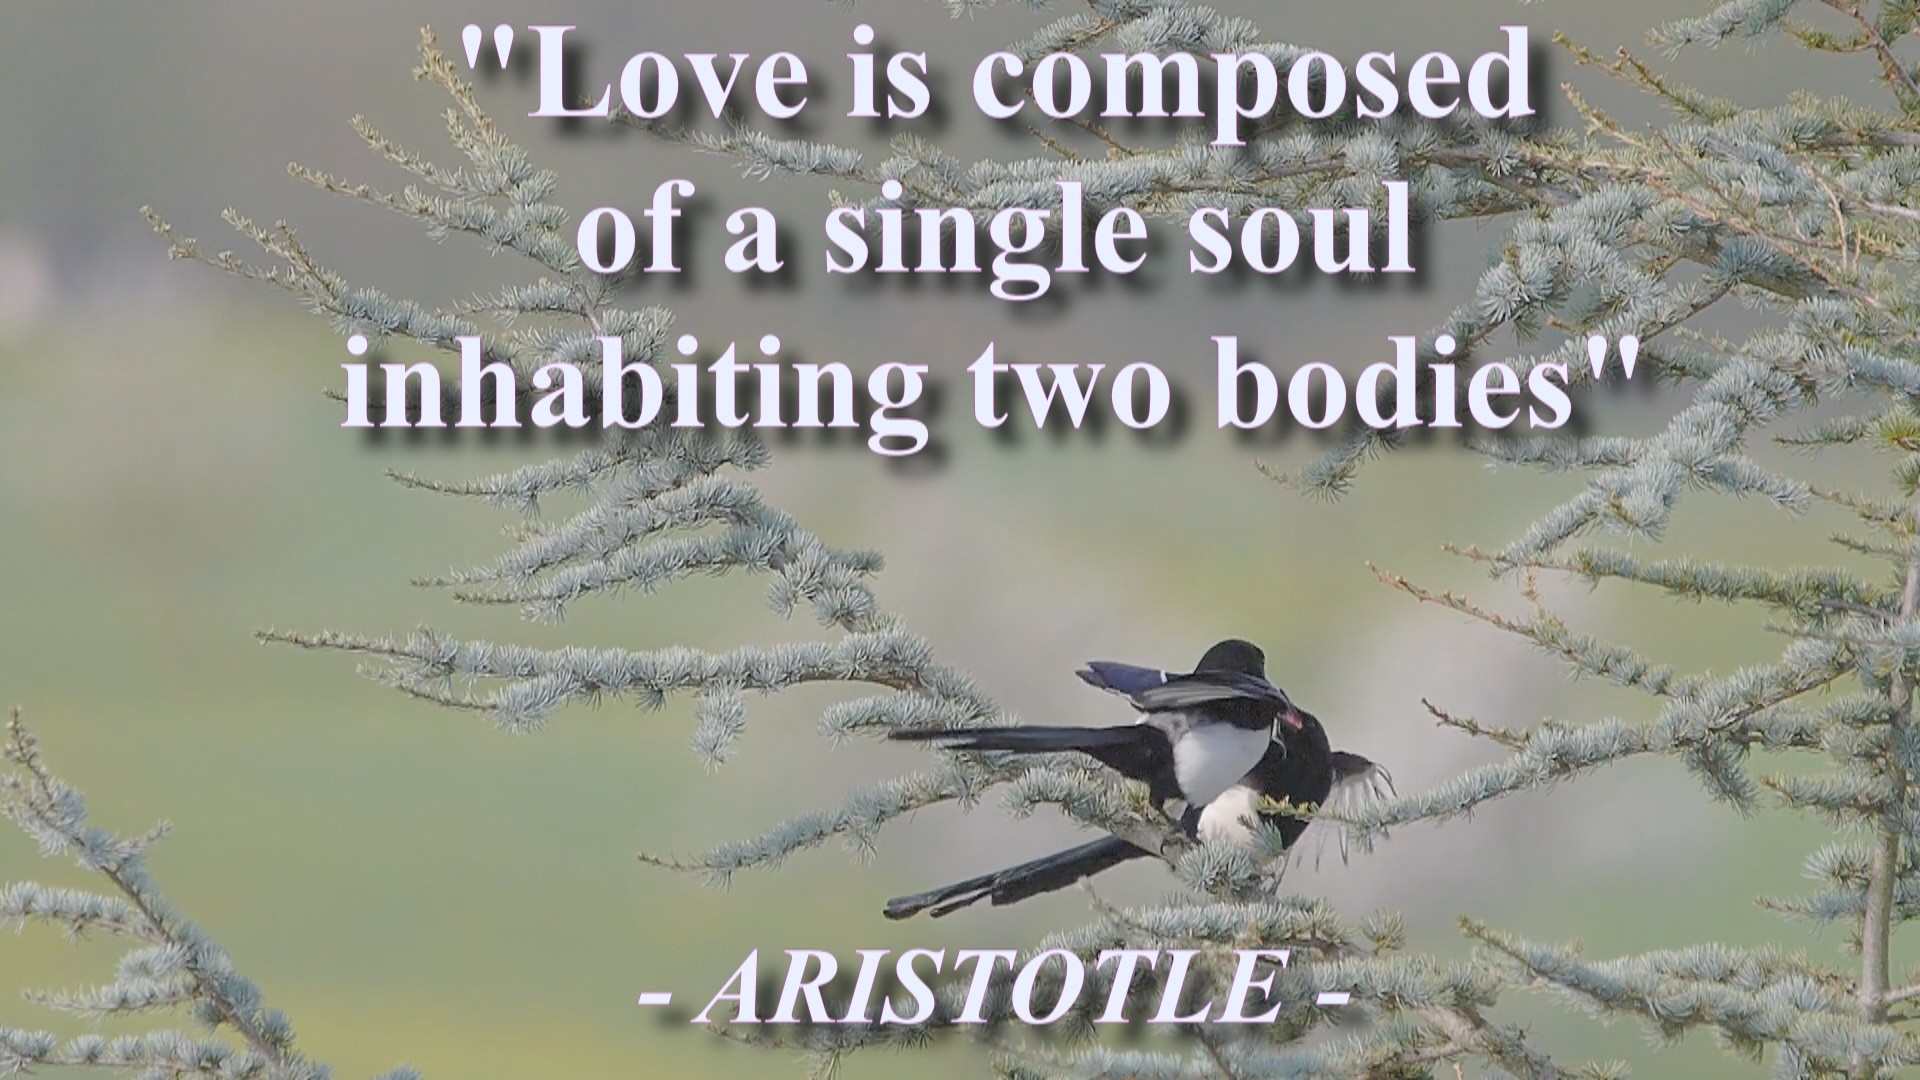 Love is composed of a single soul inhabiting two bodies - Aristotle